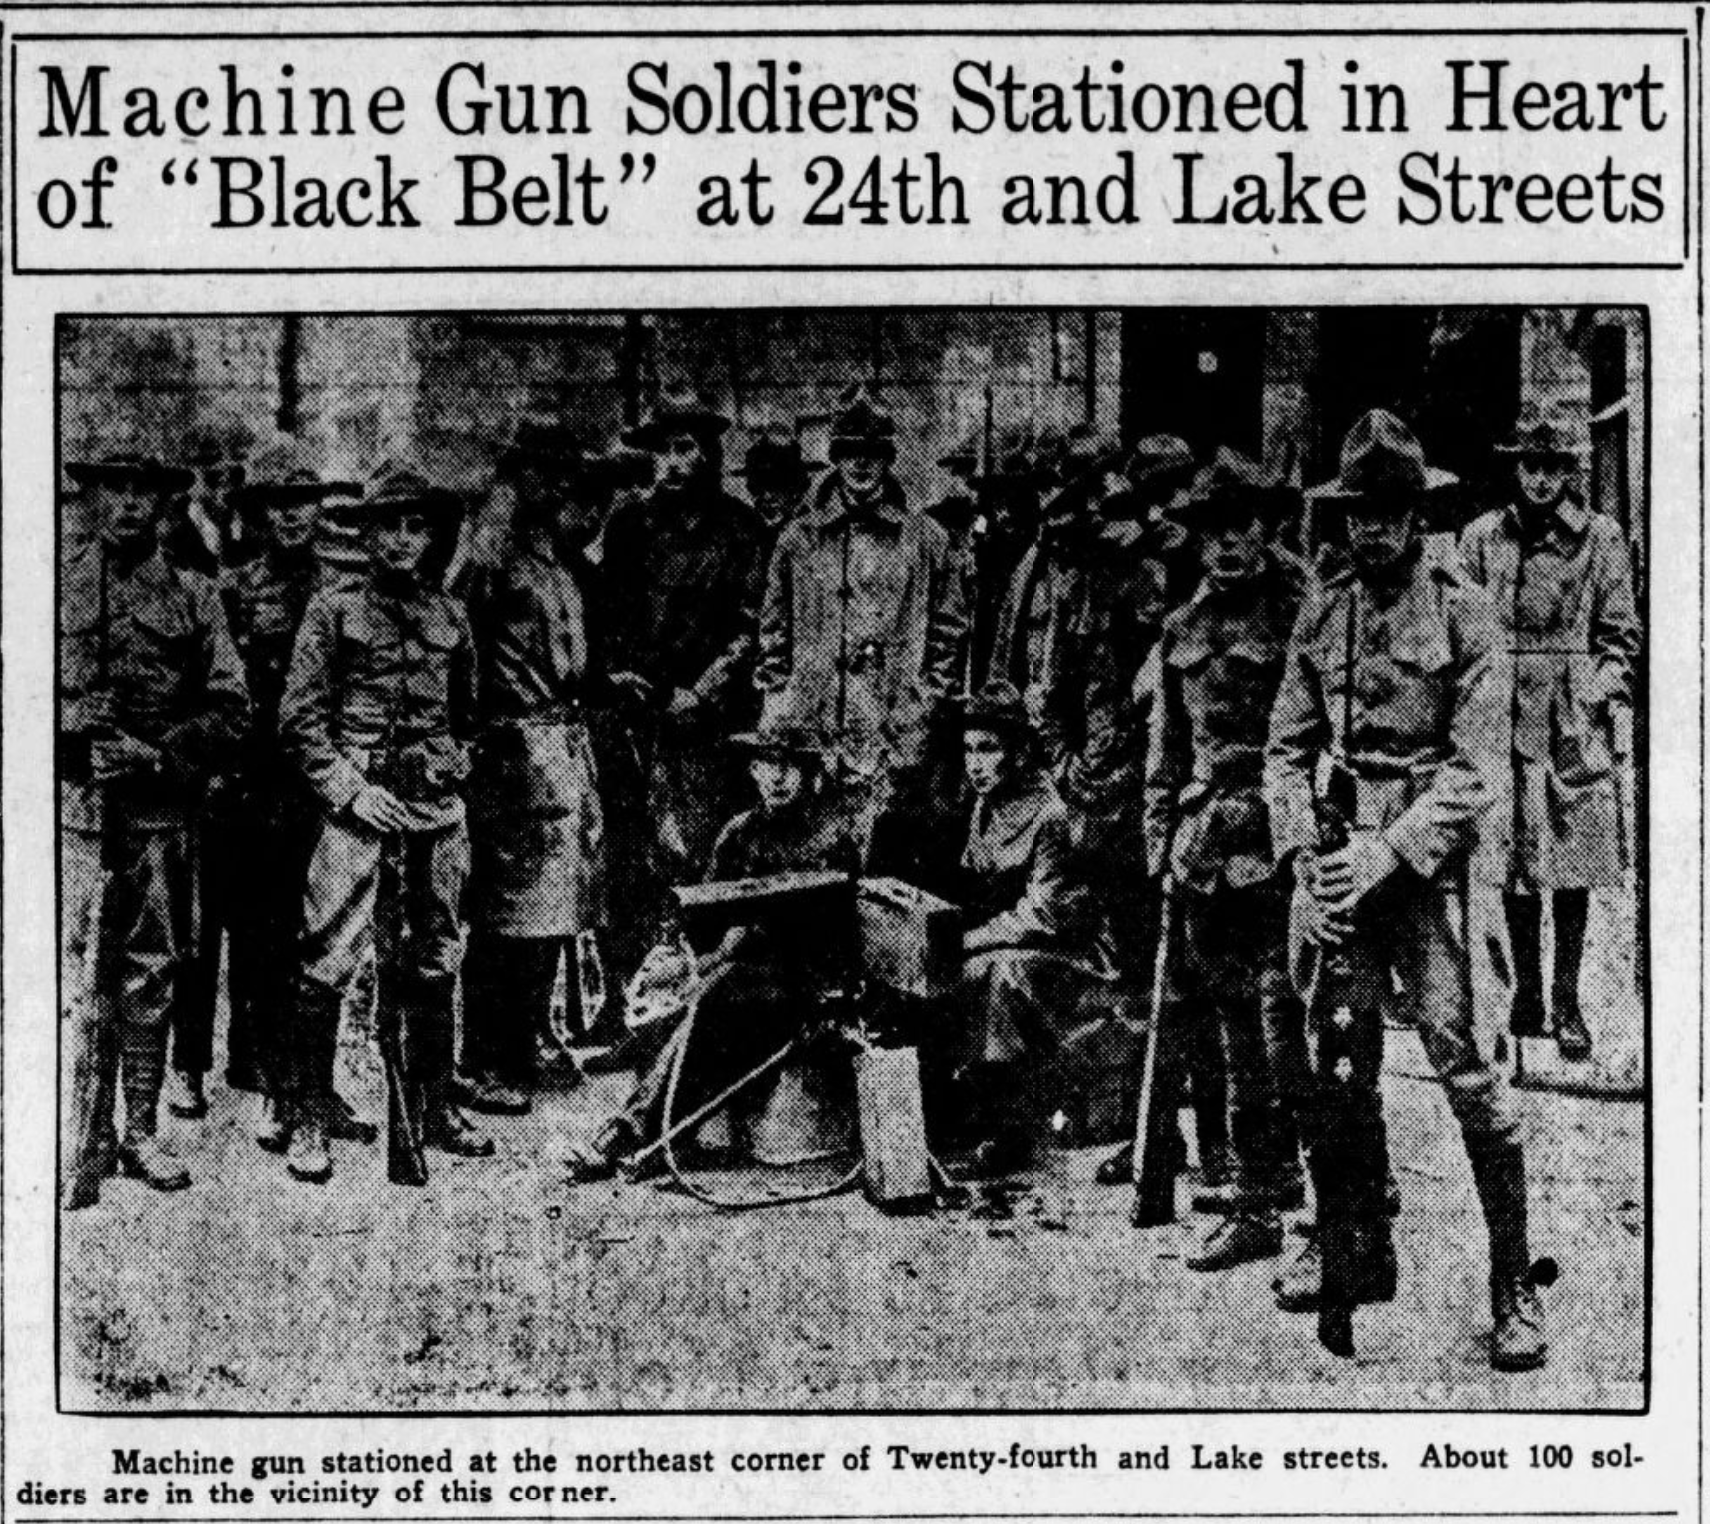 "Machine Gun Soldiers Stationed in heart of 'Black Belt' at 24th and Lake Streets" in North Omaha, Nebraska